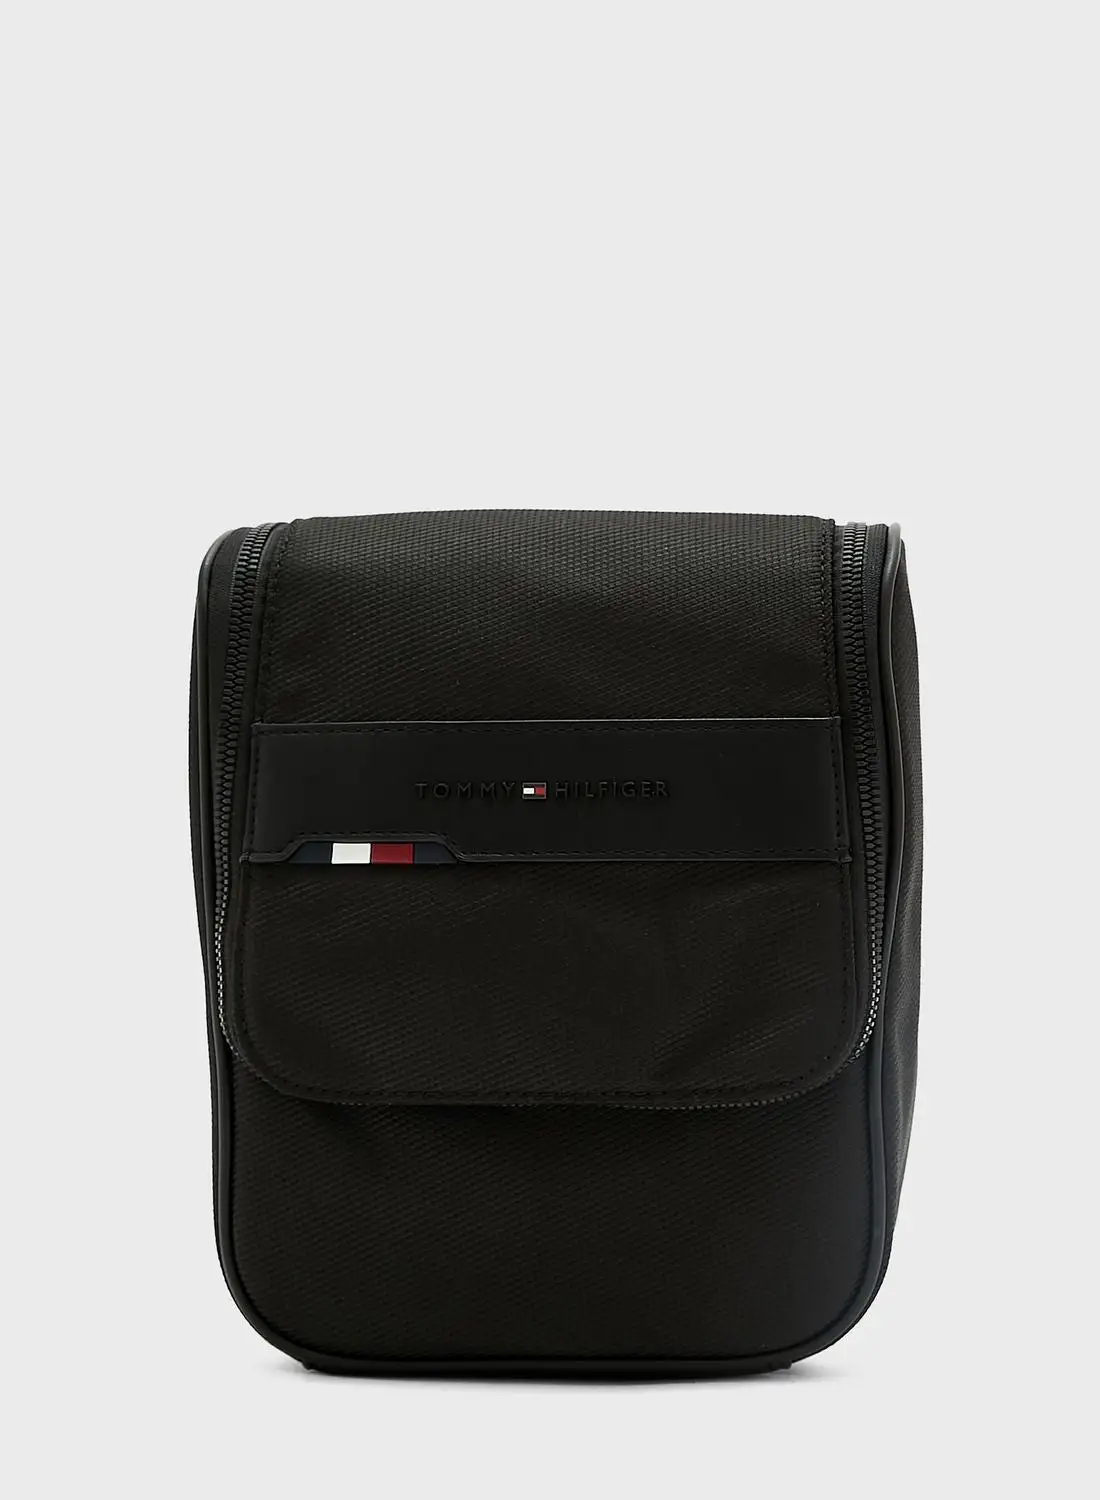 TOMMY JEANS Logo Toiletry Bag